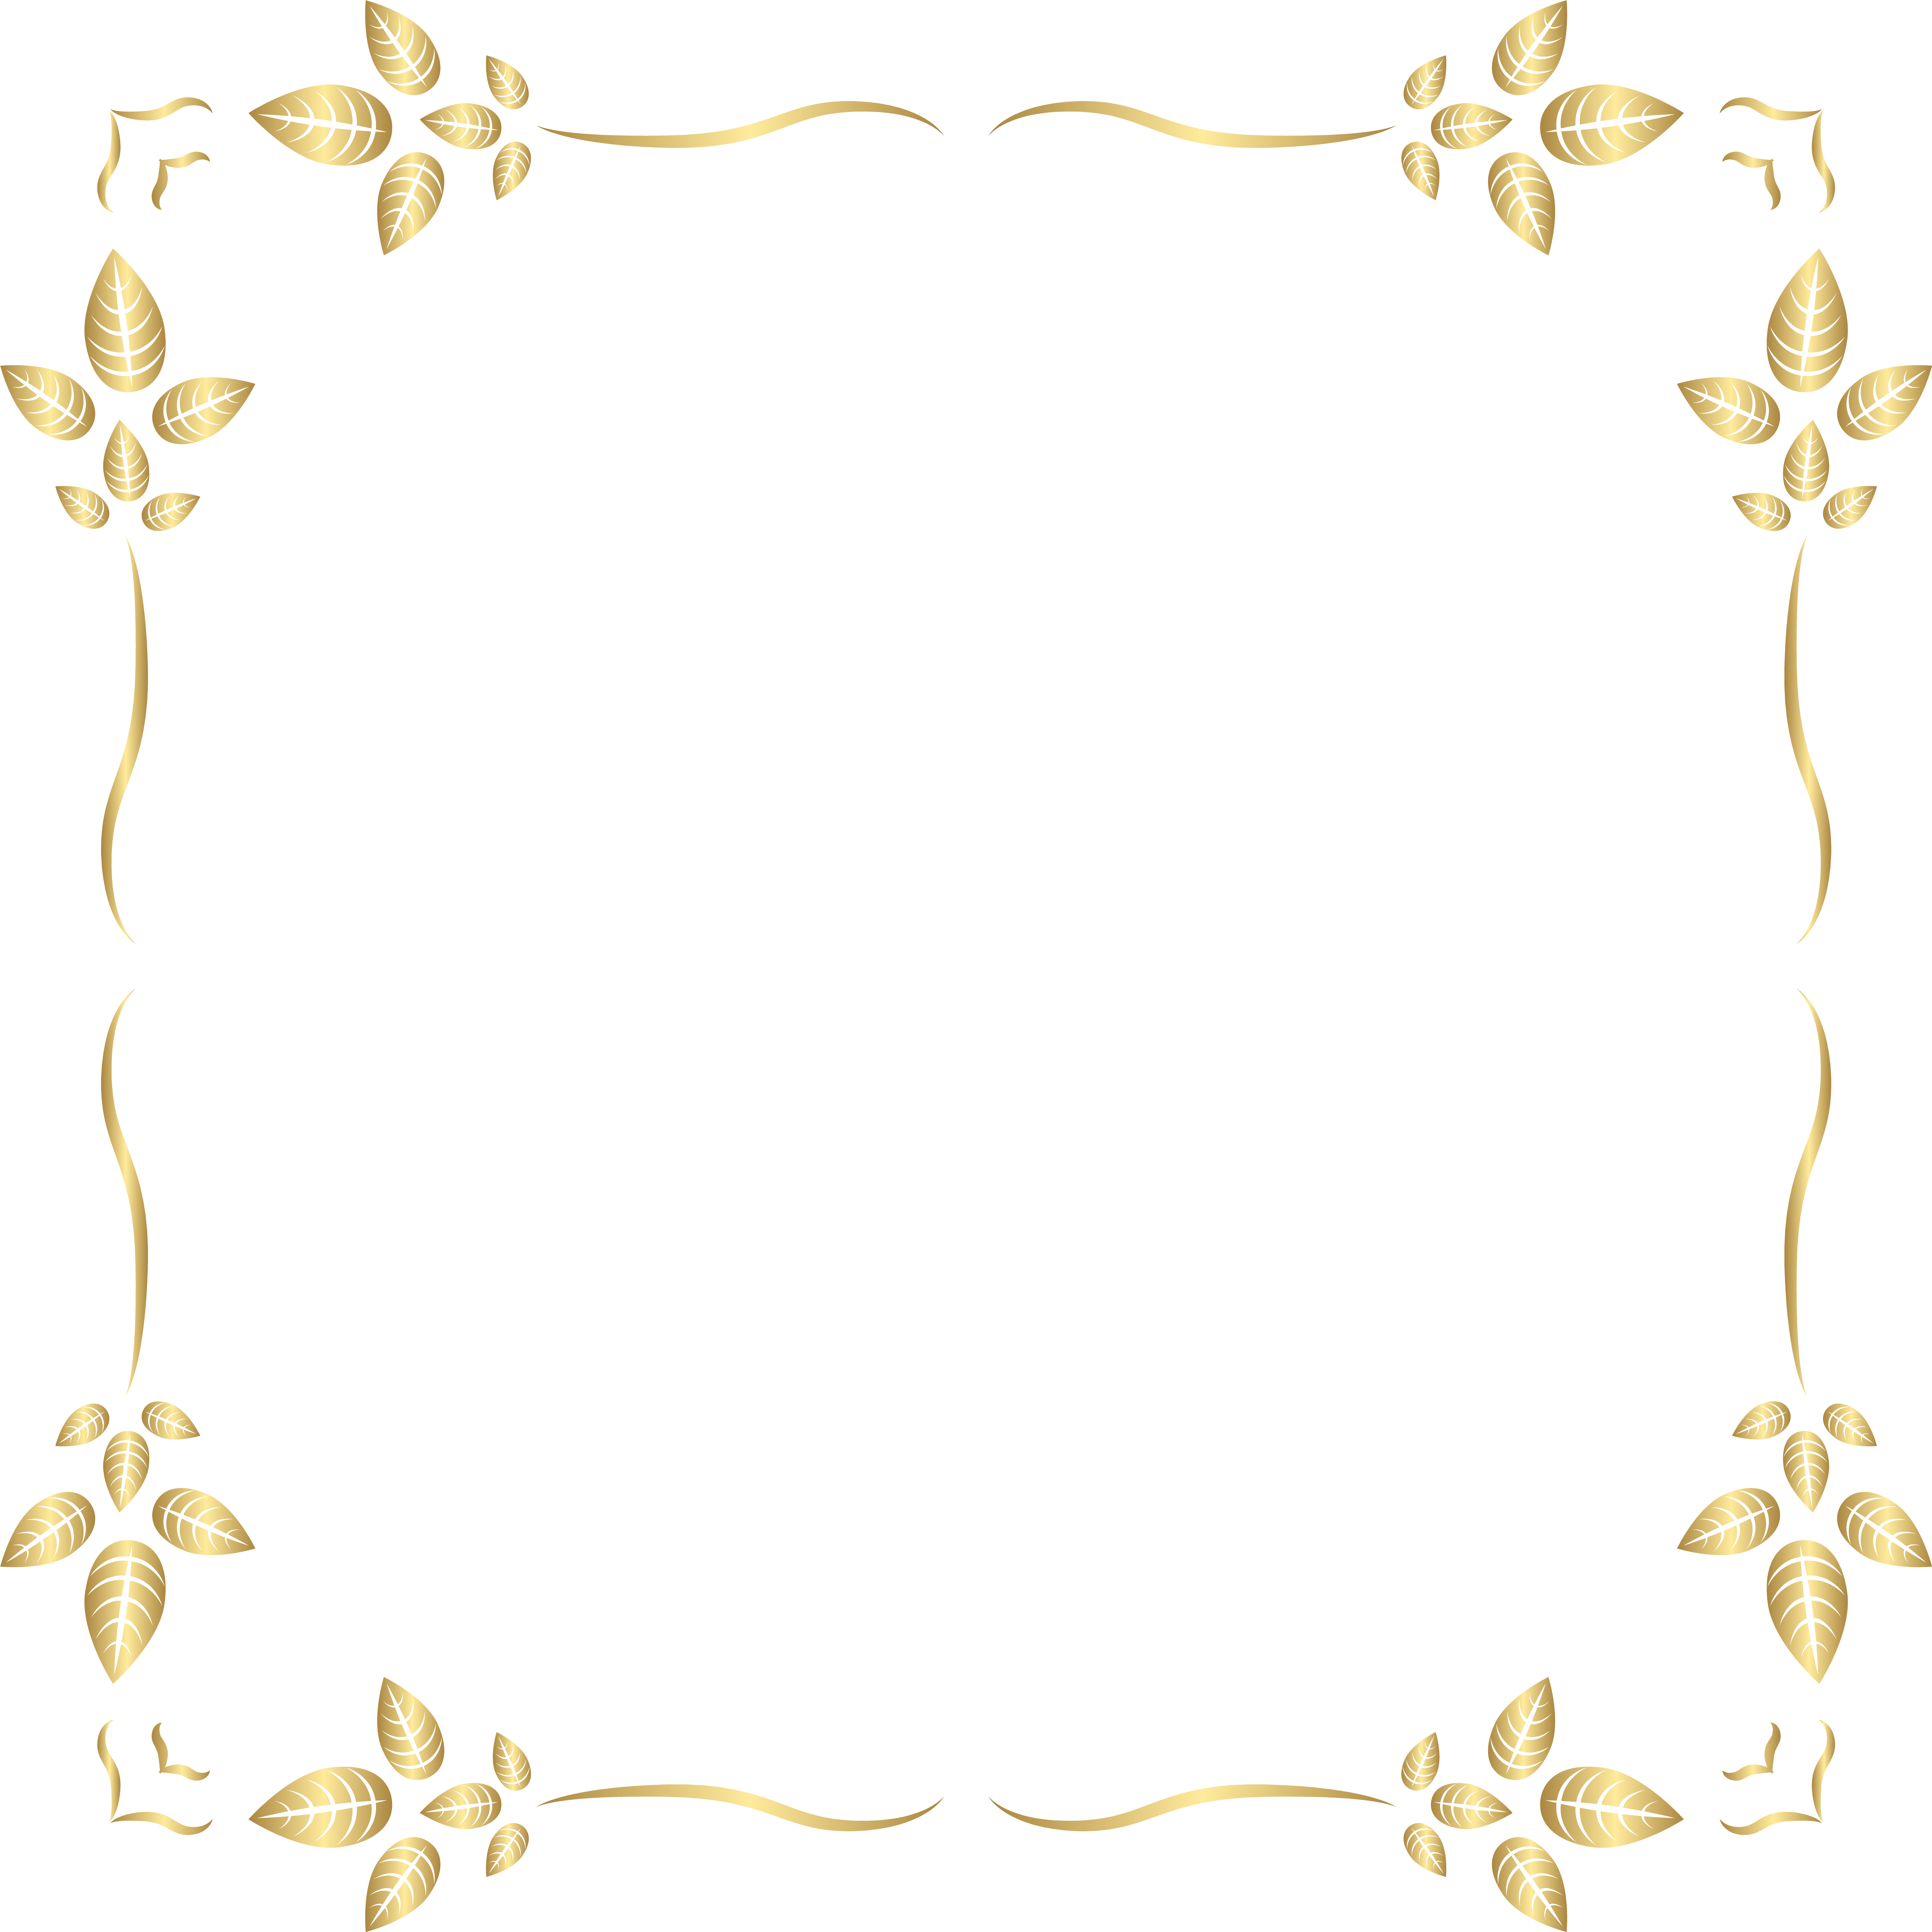 Download Banner Royalty Free Download Clip Art Golden Border PNG Image with  No Background 